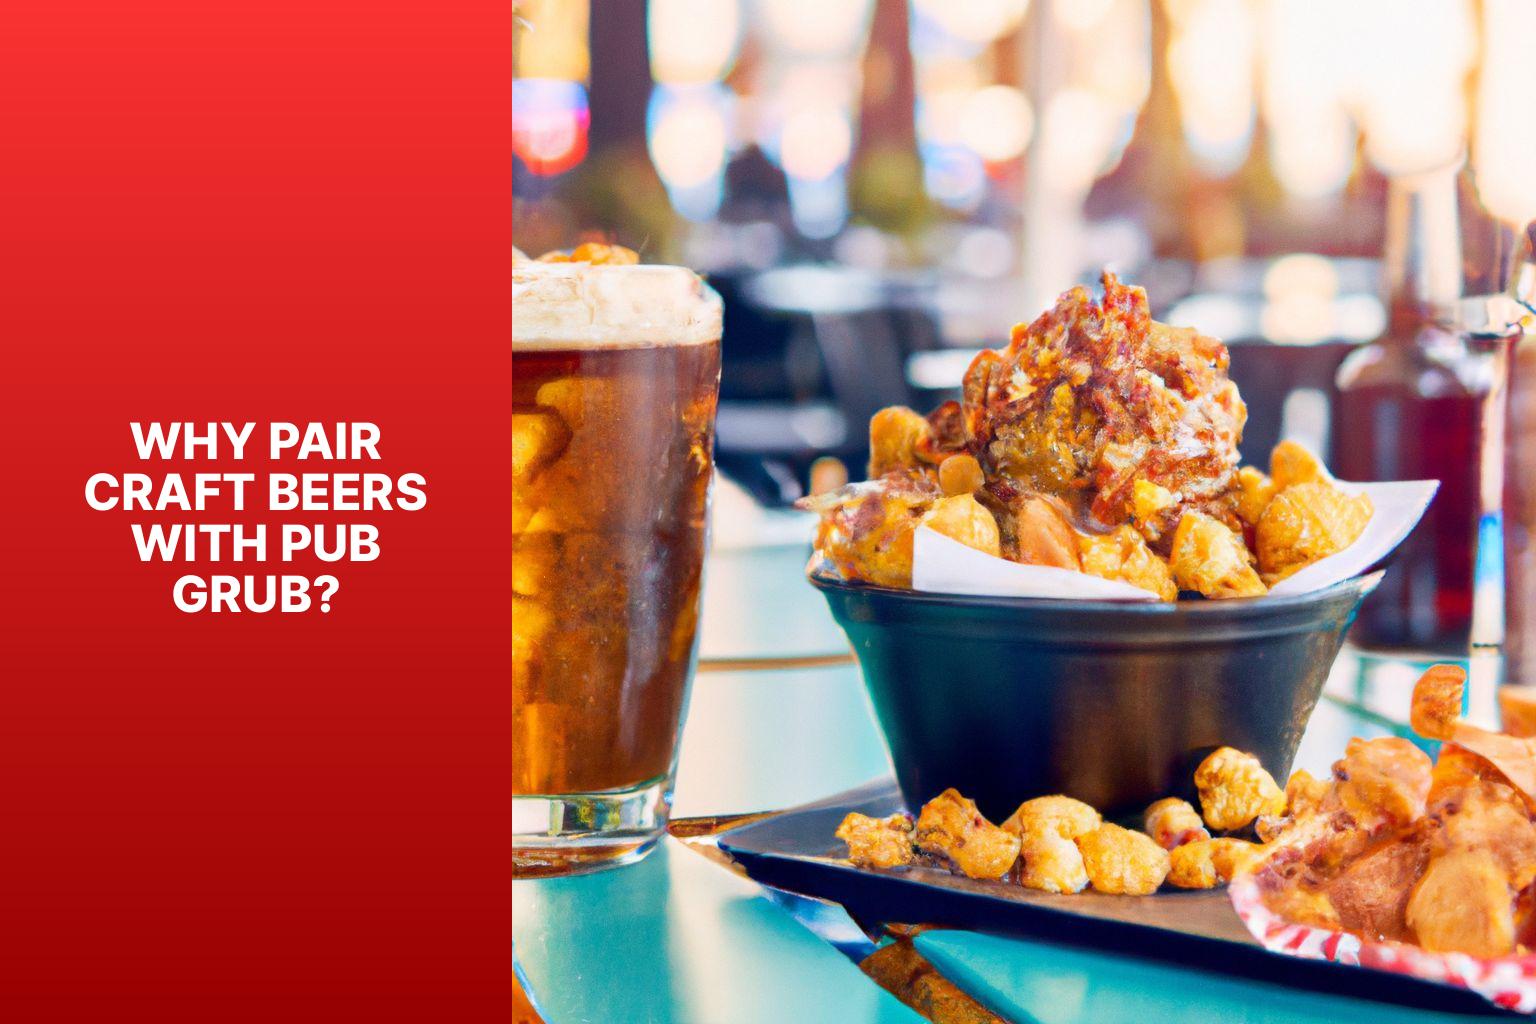 Why Pair Craft Beers with Pub Grub? - Craft Beers: Pairing with Pub Grub 